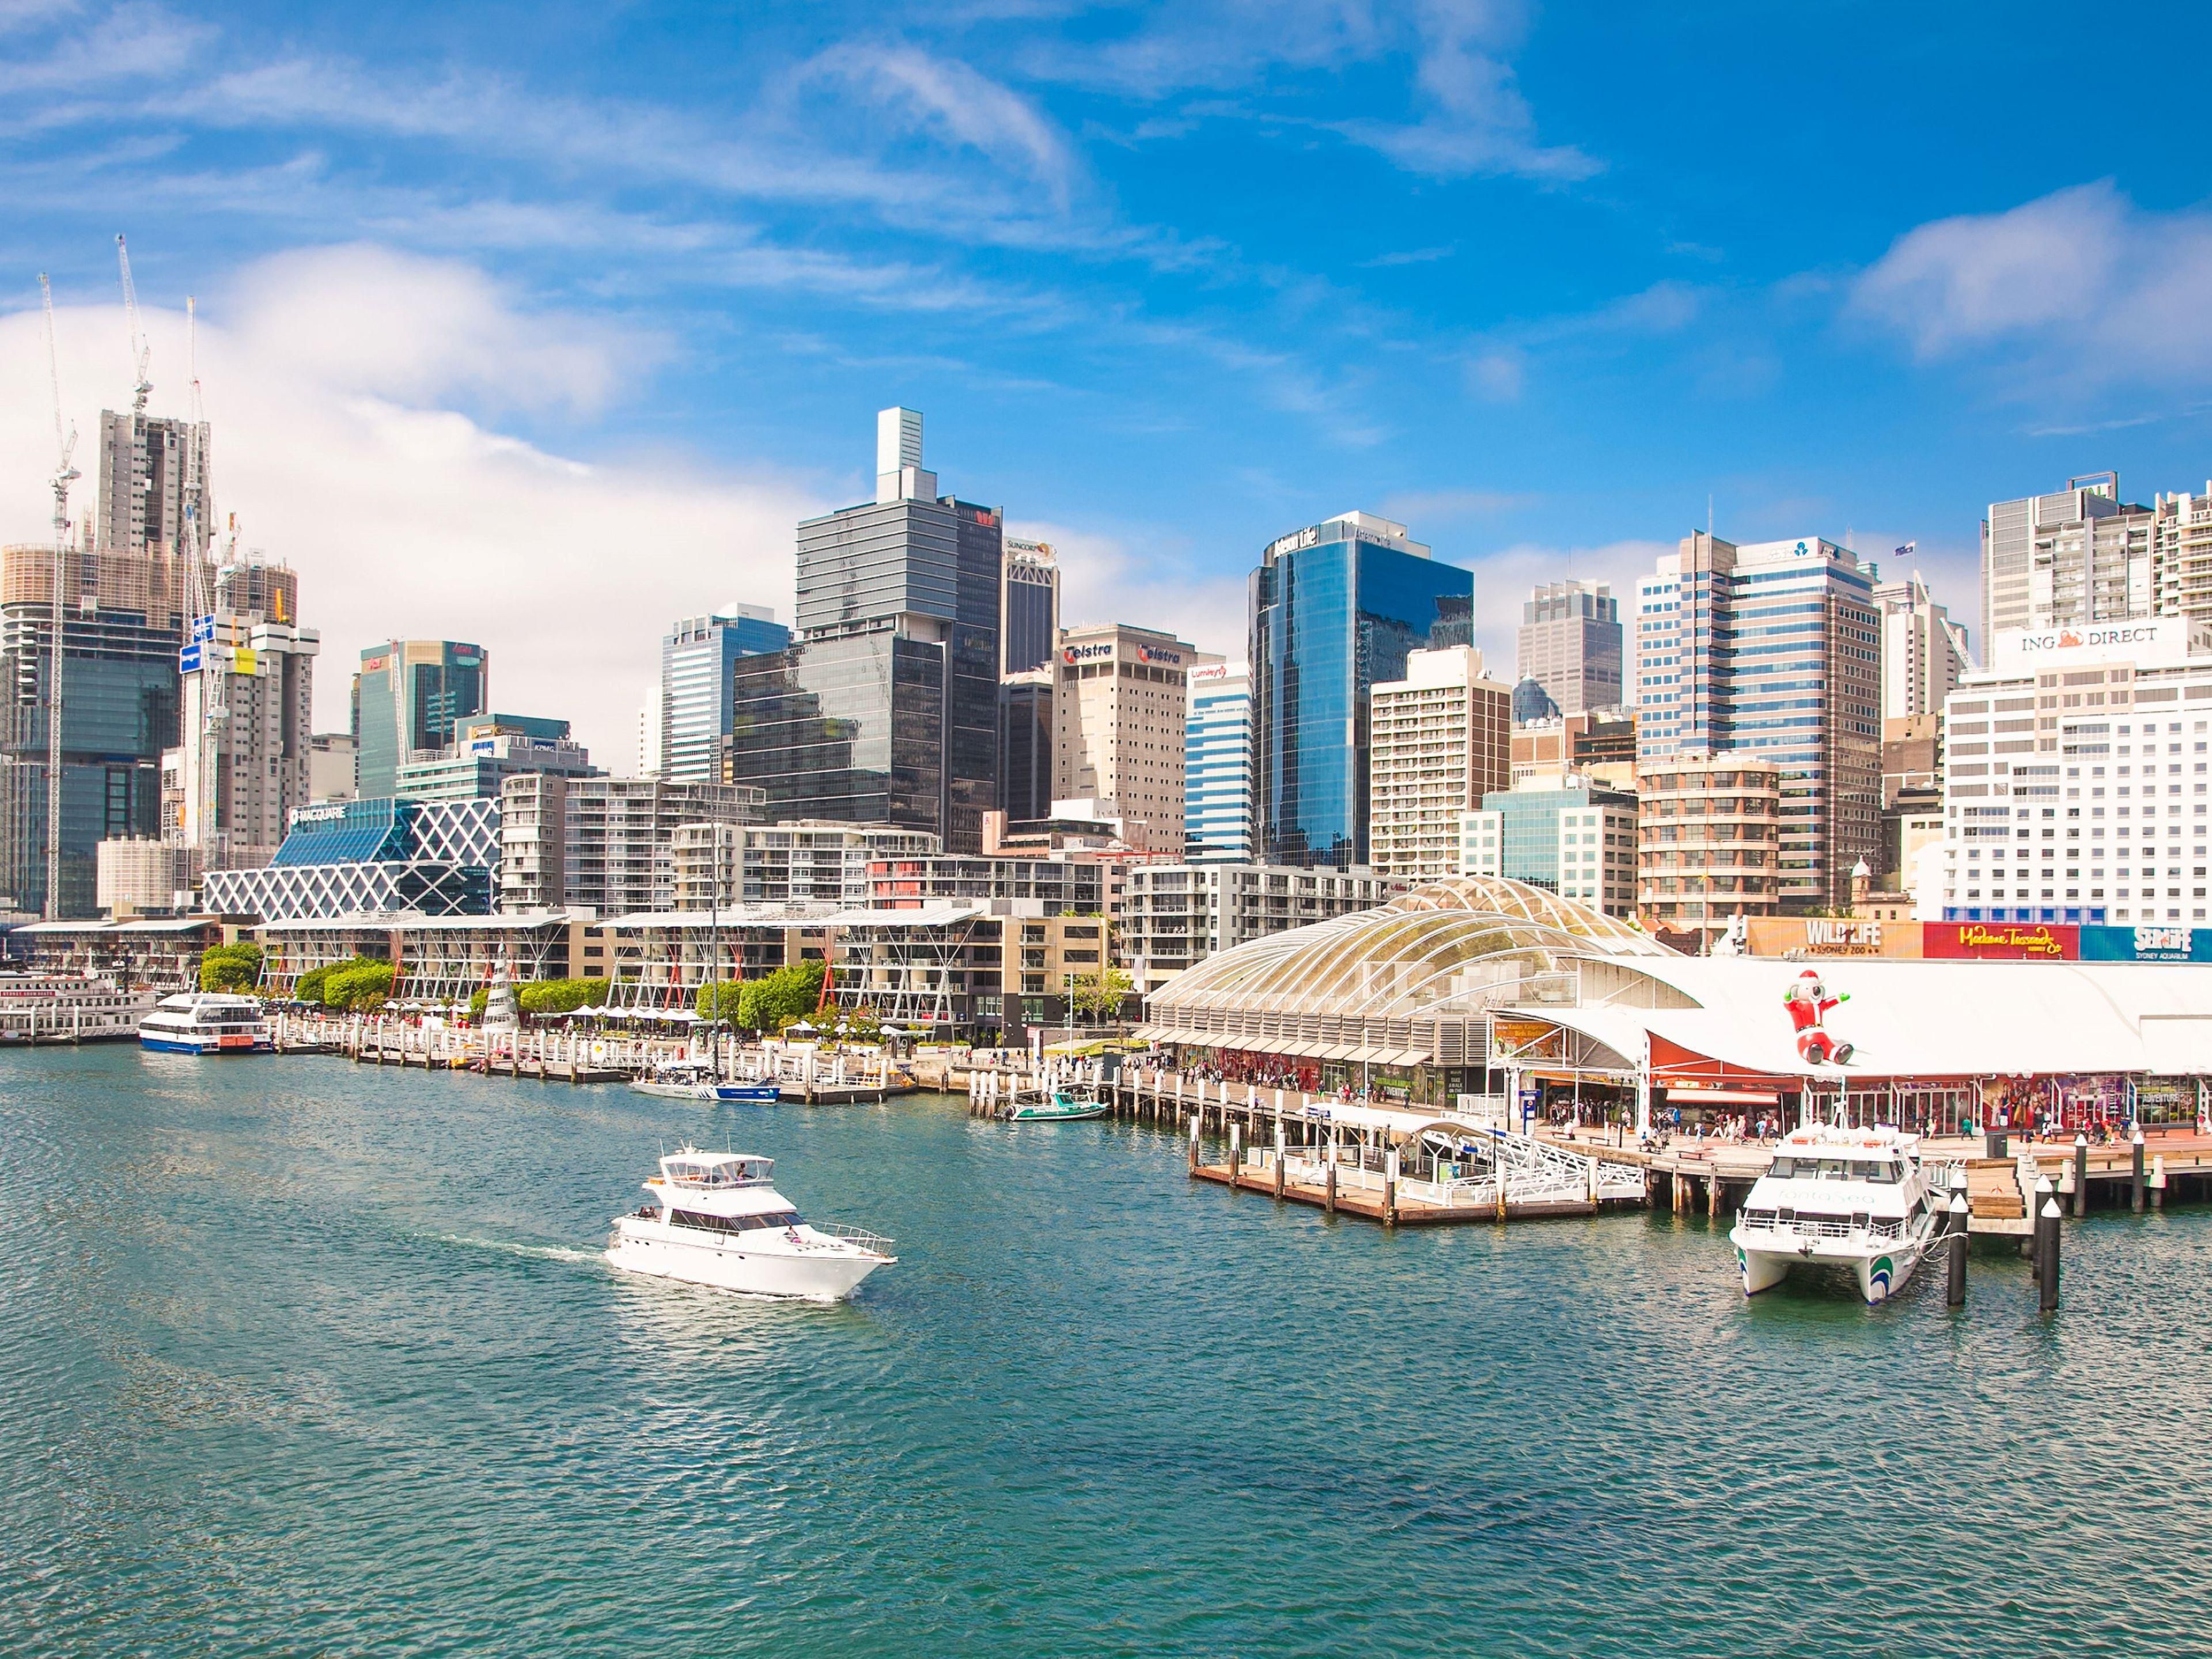 Located within 5 minutes' walk of Darling Harbour, a buzzing waterside district where you can enjoy events & attractions, eat, drink, shop and get carried away by the beautiful fireworks happening every Saturday evening. 